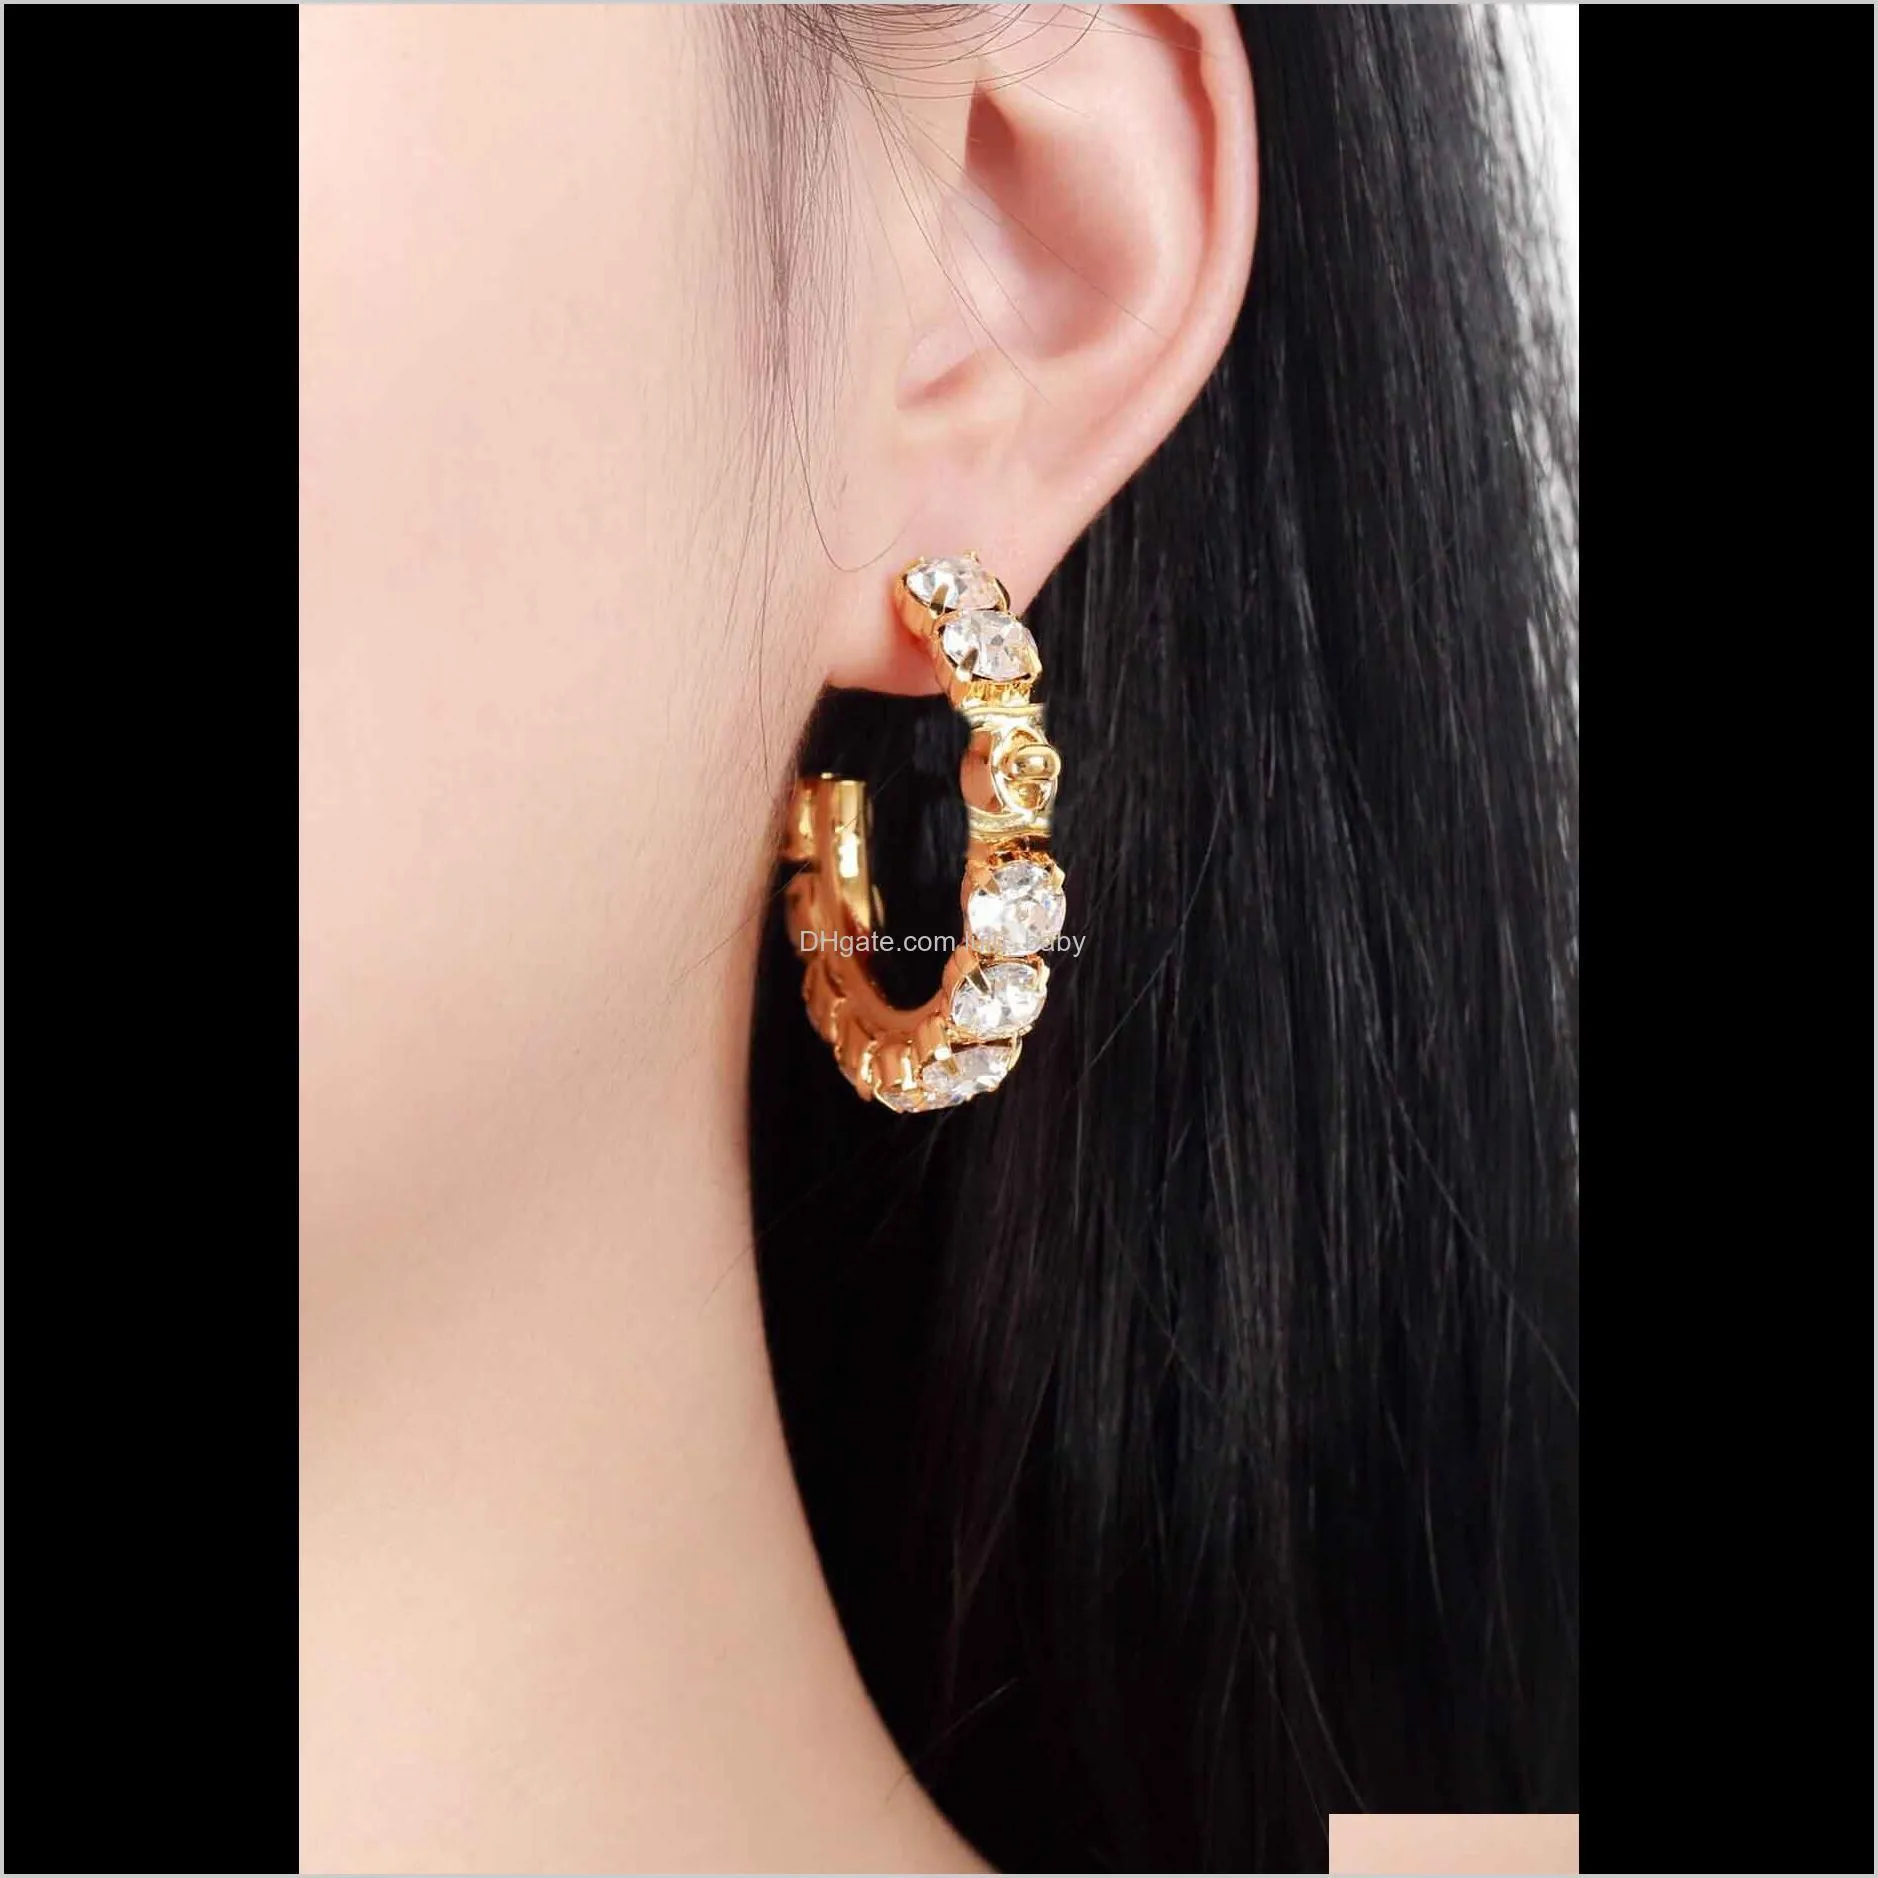 2021 hot sale new arrival small hook drop earring with diamond for women wedding jewelry gift in 18k gold plated shipping ps4035